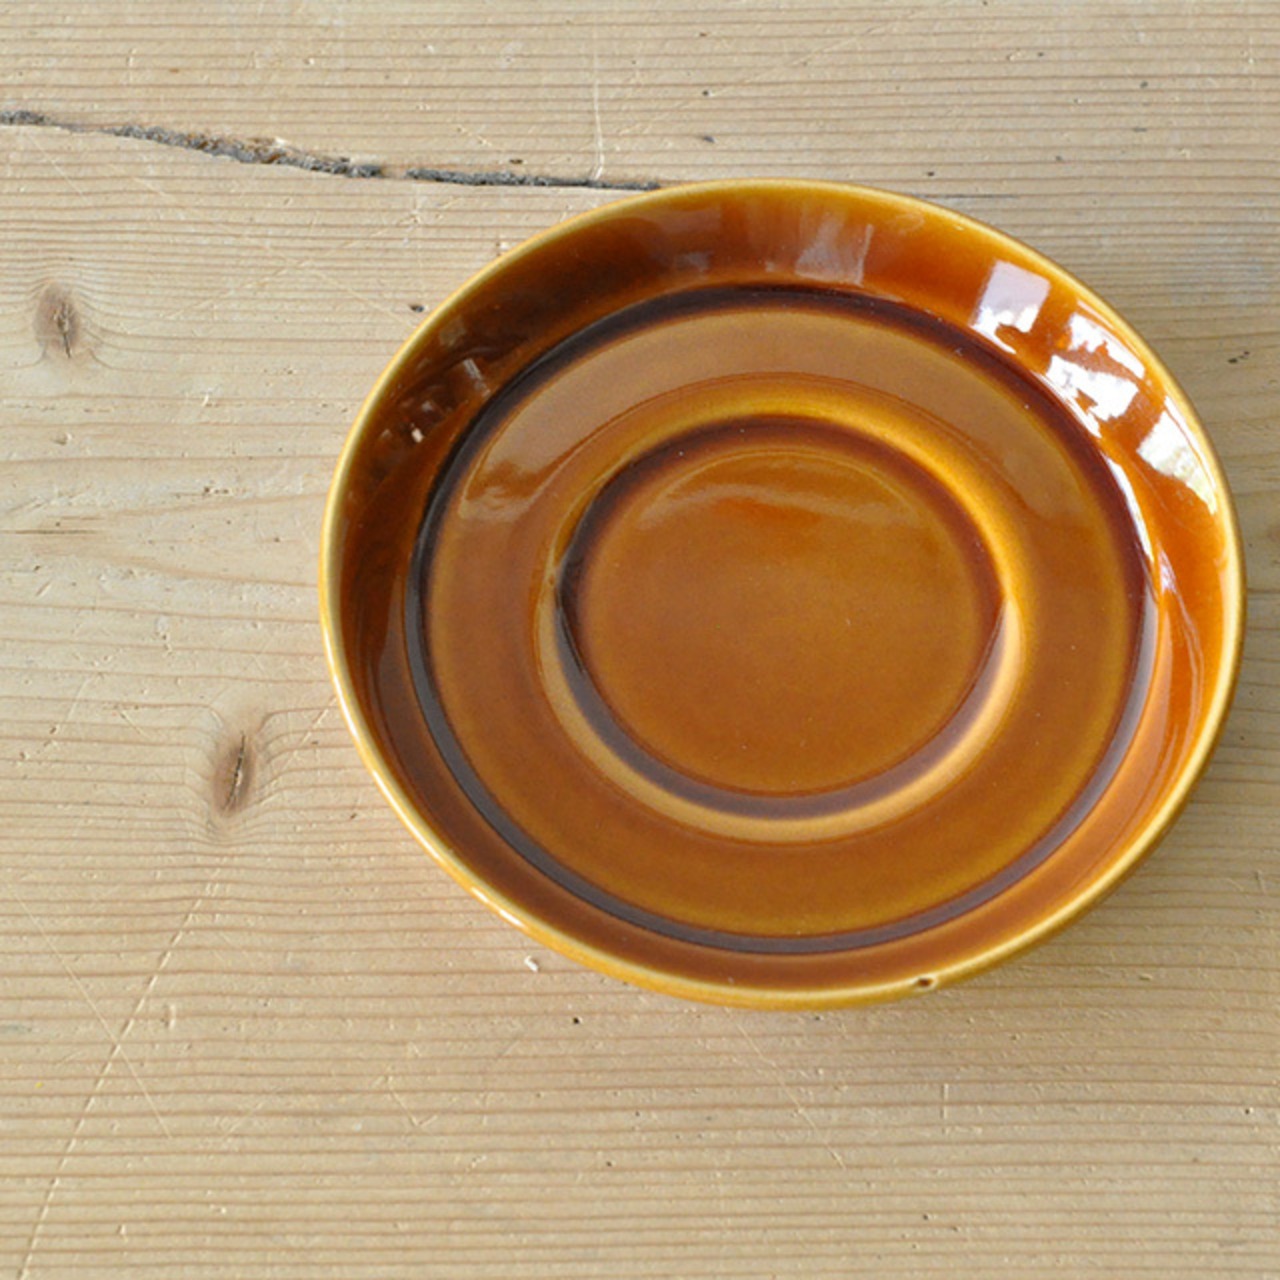 Portmeirion Cup & Saucer / ポートメリオン カップ&ソーサー / 1911-0163-1